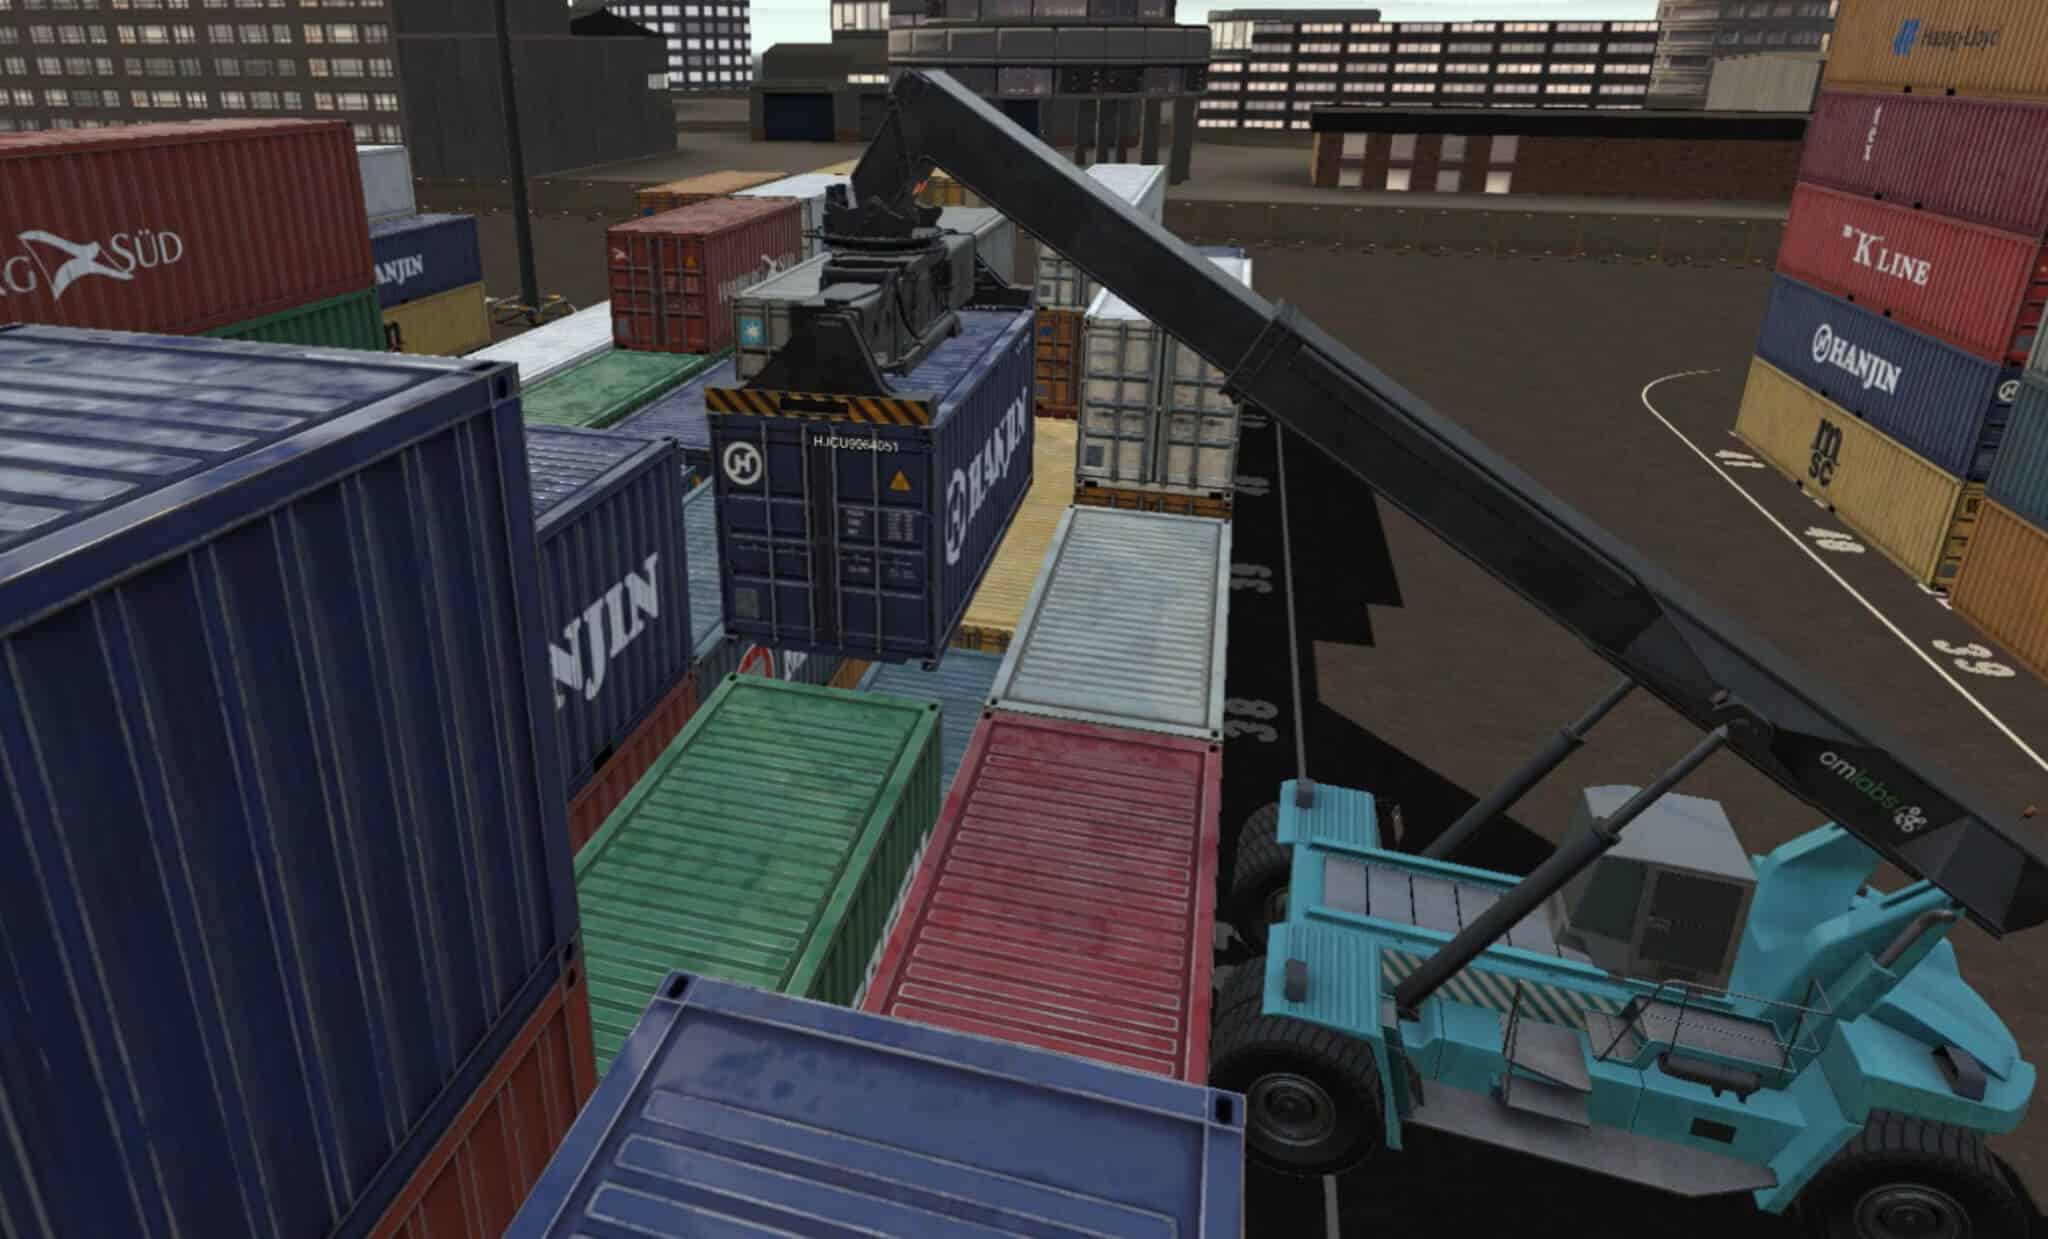 Reachstacker Simulator Training Pack – Dropping a container